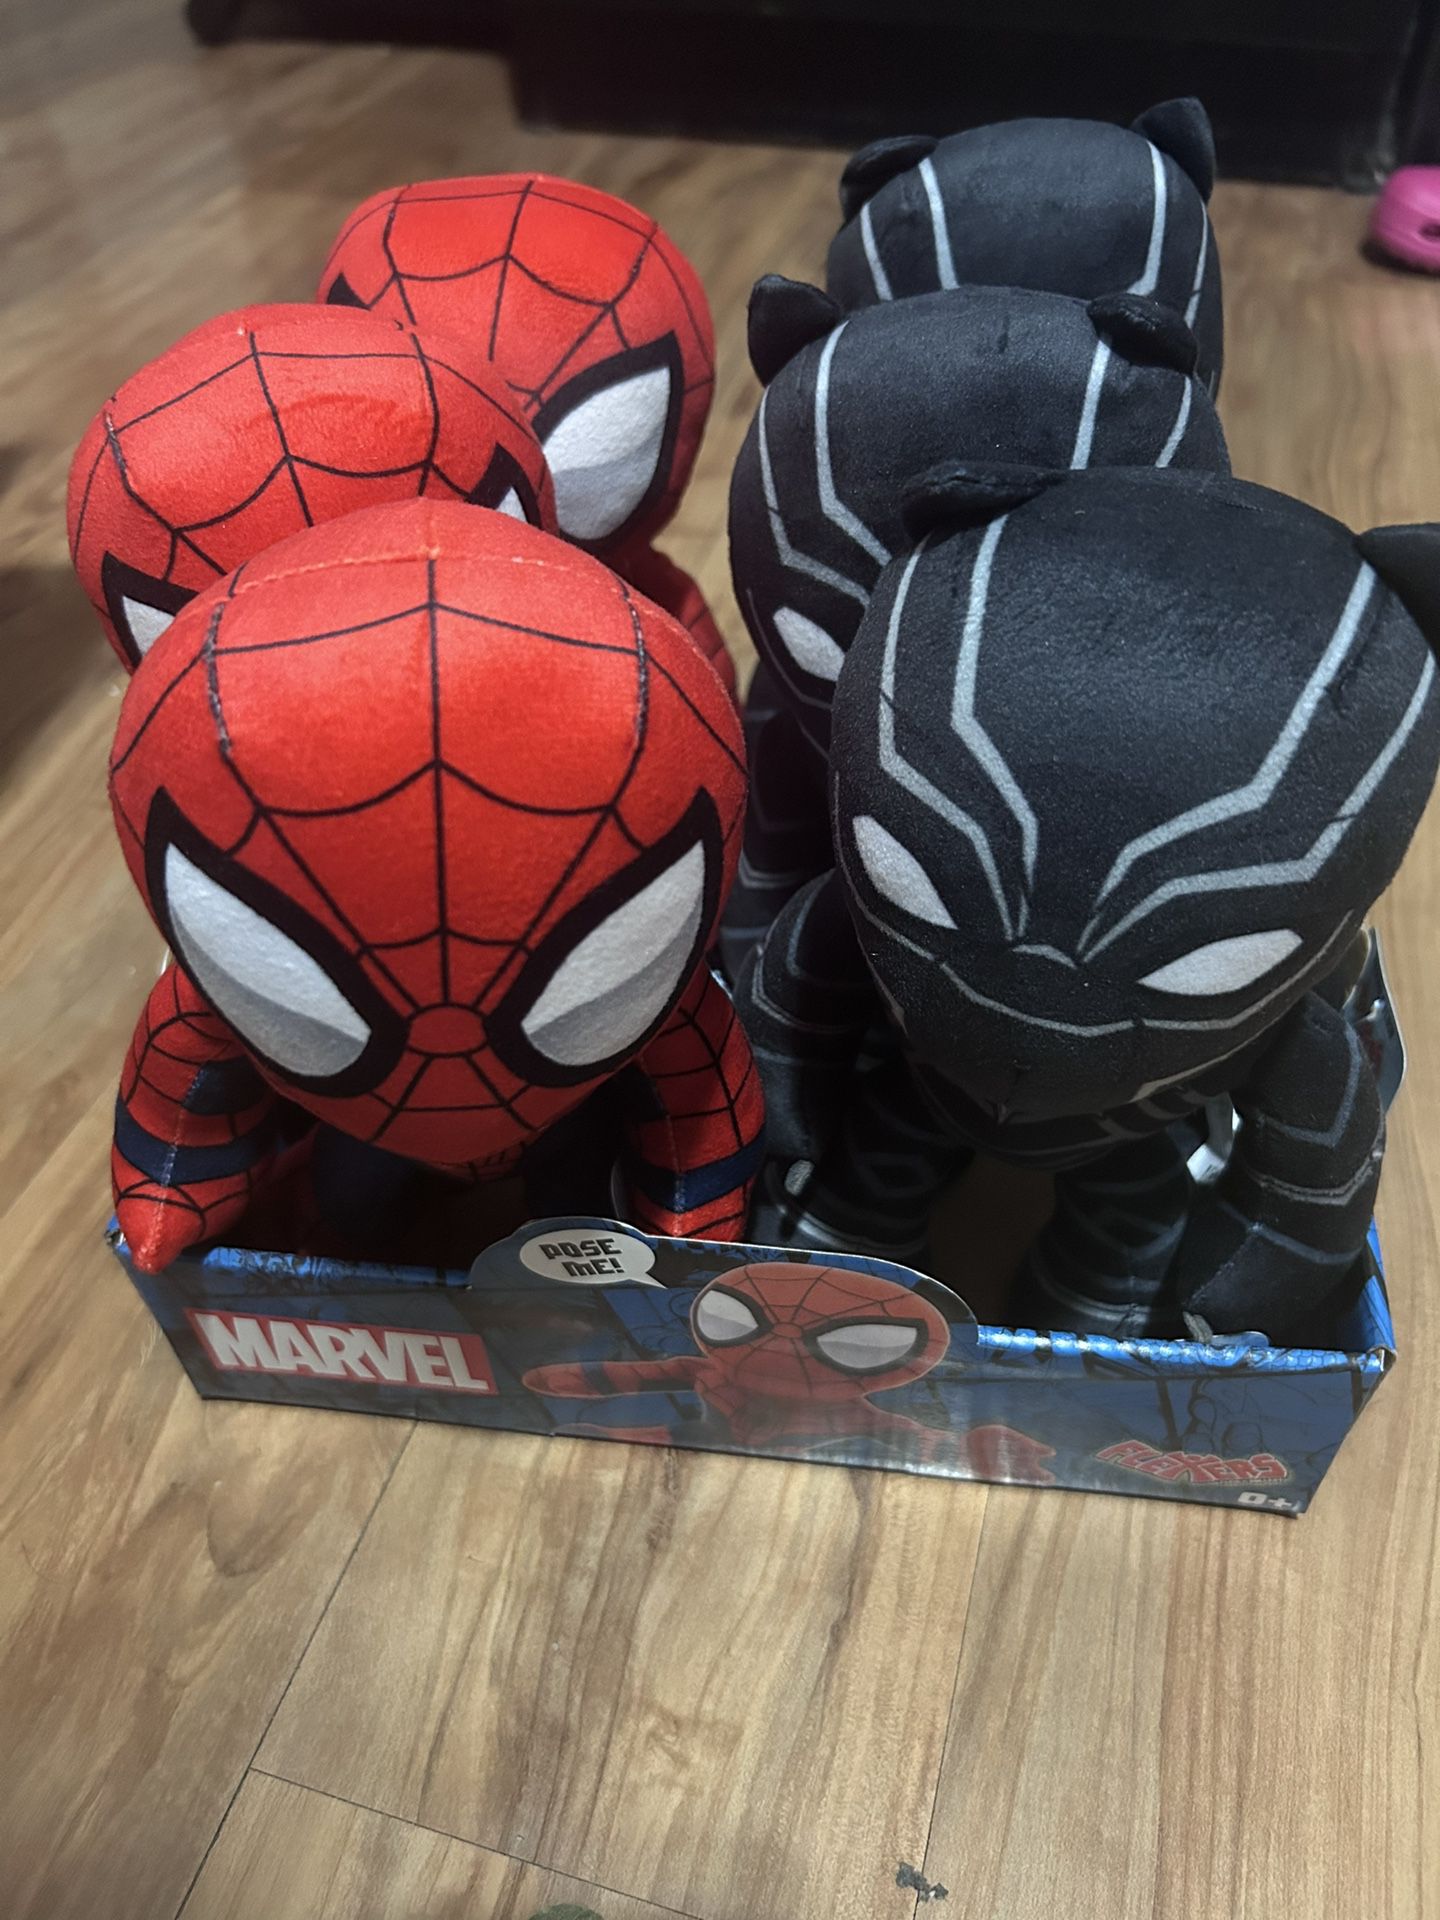 Spider-Man And Black Panther Plushies (7 Boxes with 6 Plushies.) Each box Is $27